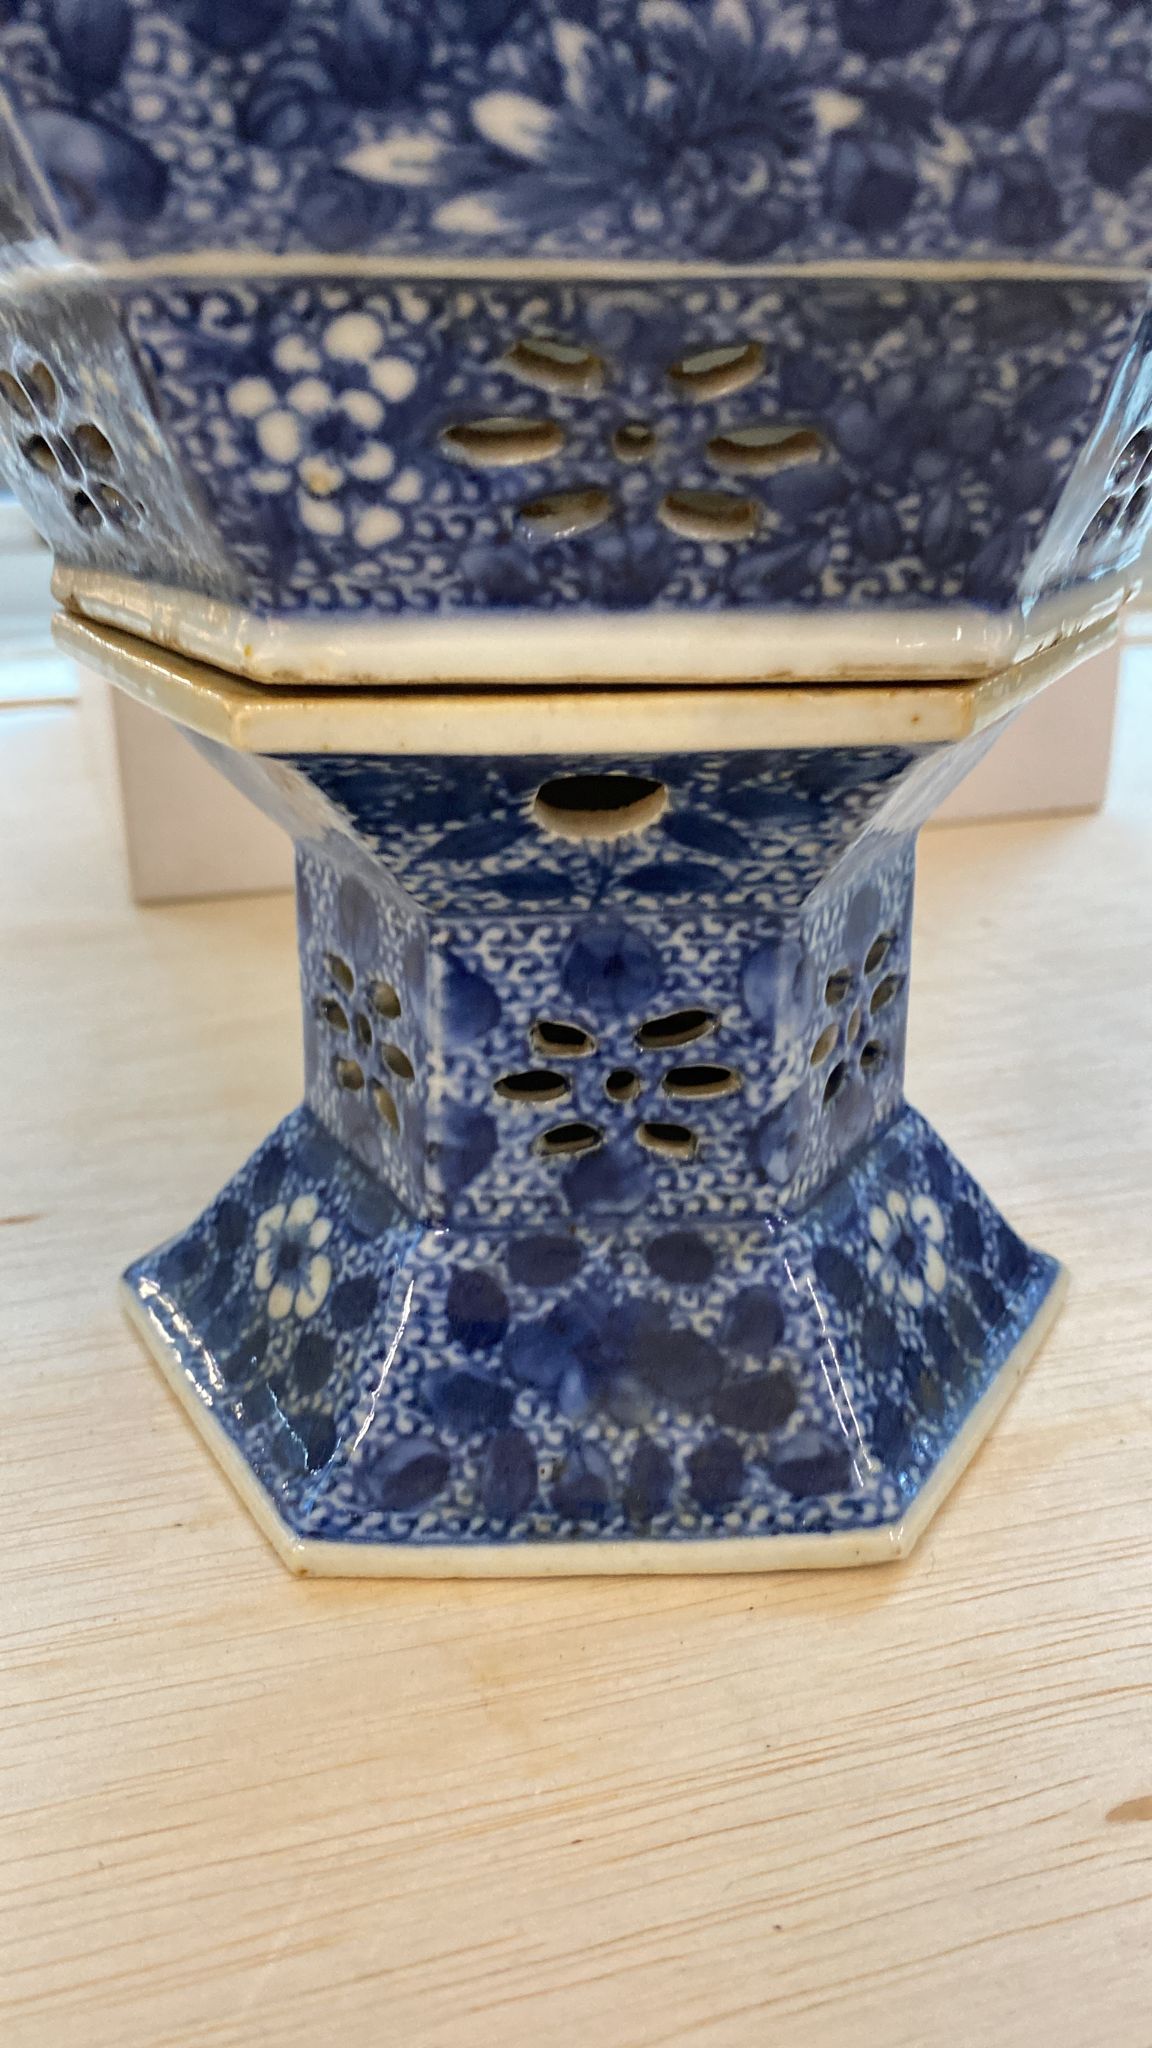 A PAIR OF BLUE AND WHITE RETICULATED PORCELAIN LANTERNS - Image 11 of 13